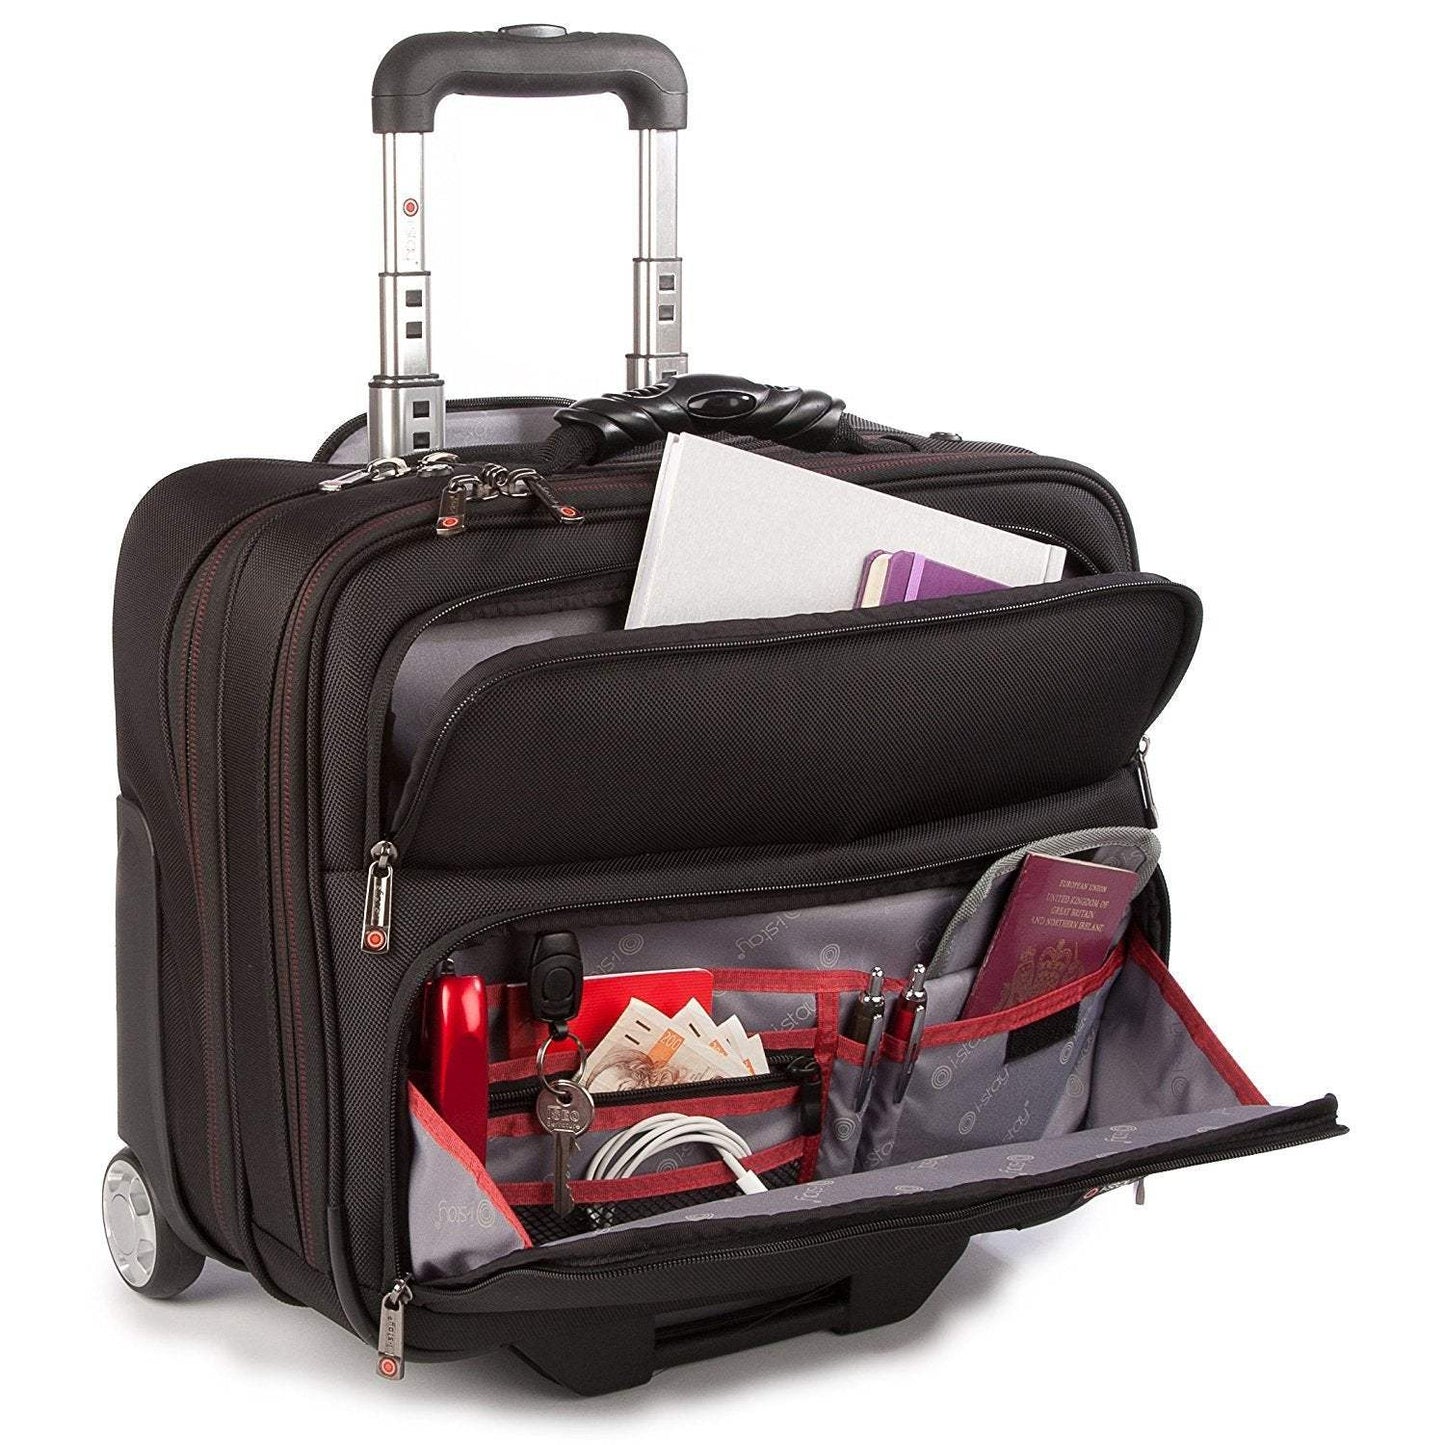 i-stay 15.6inch Laptop Tablet Business Trolley Case - The Luxury Promotional Gifts Company Limited